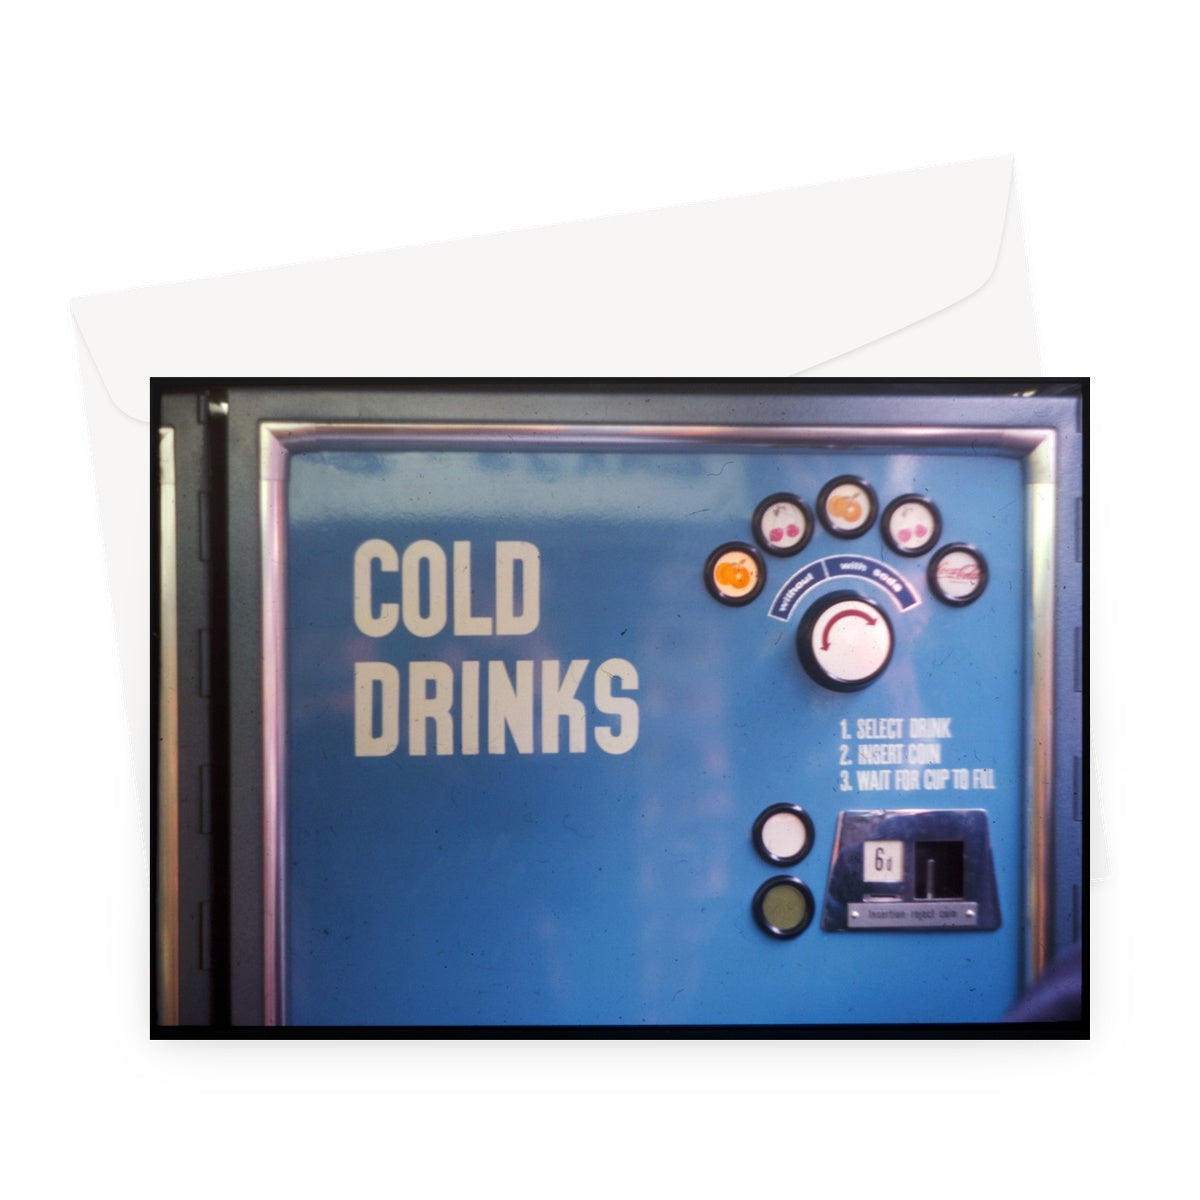 Cold Drinks Machine London by Bob Hyde, 1960s - Greeting Card